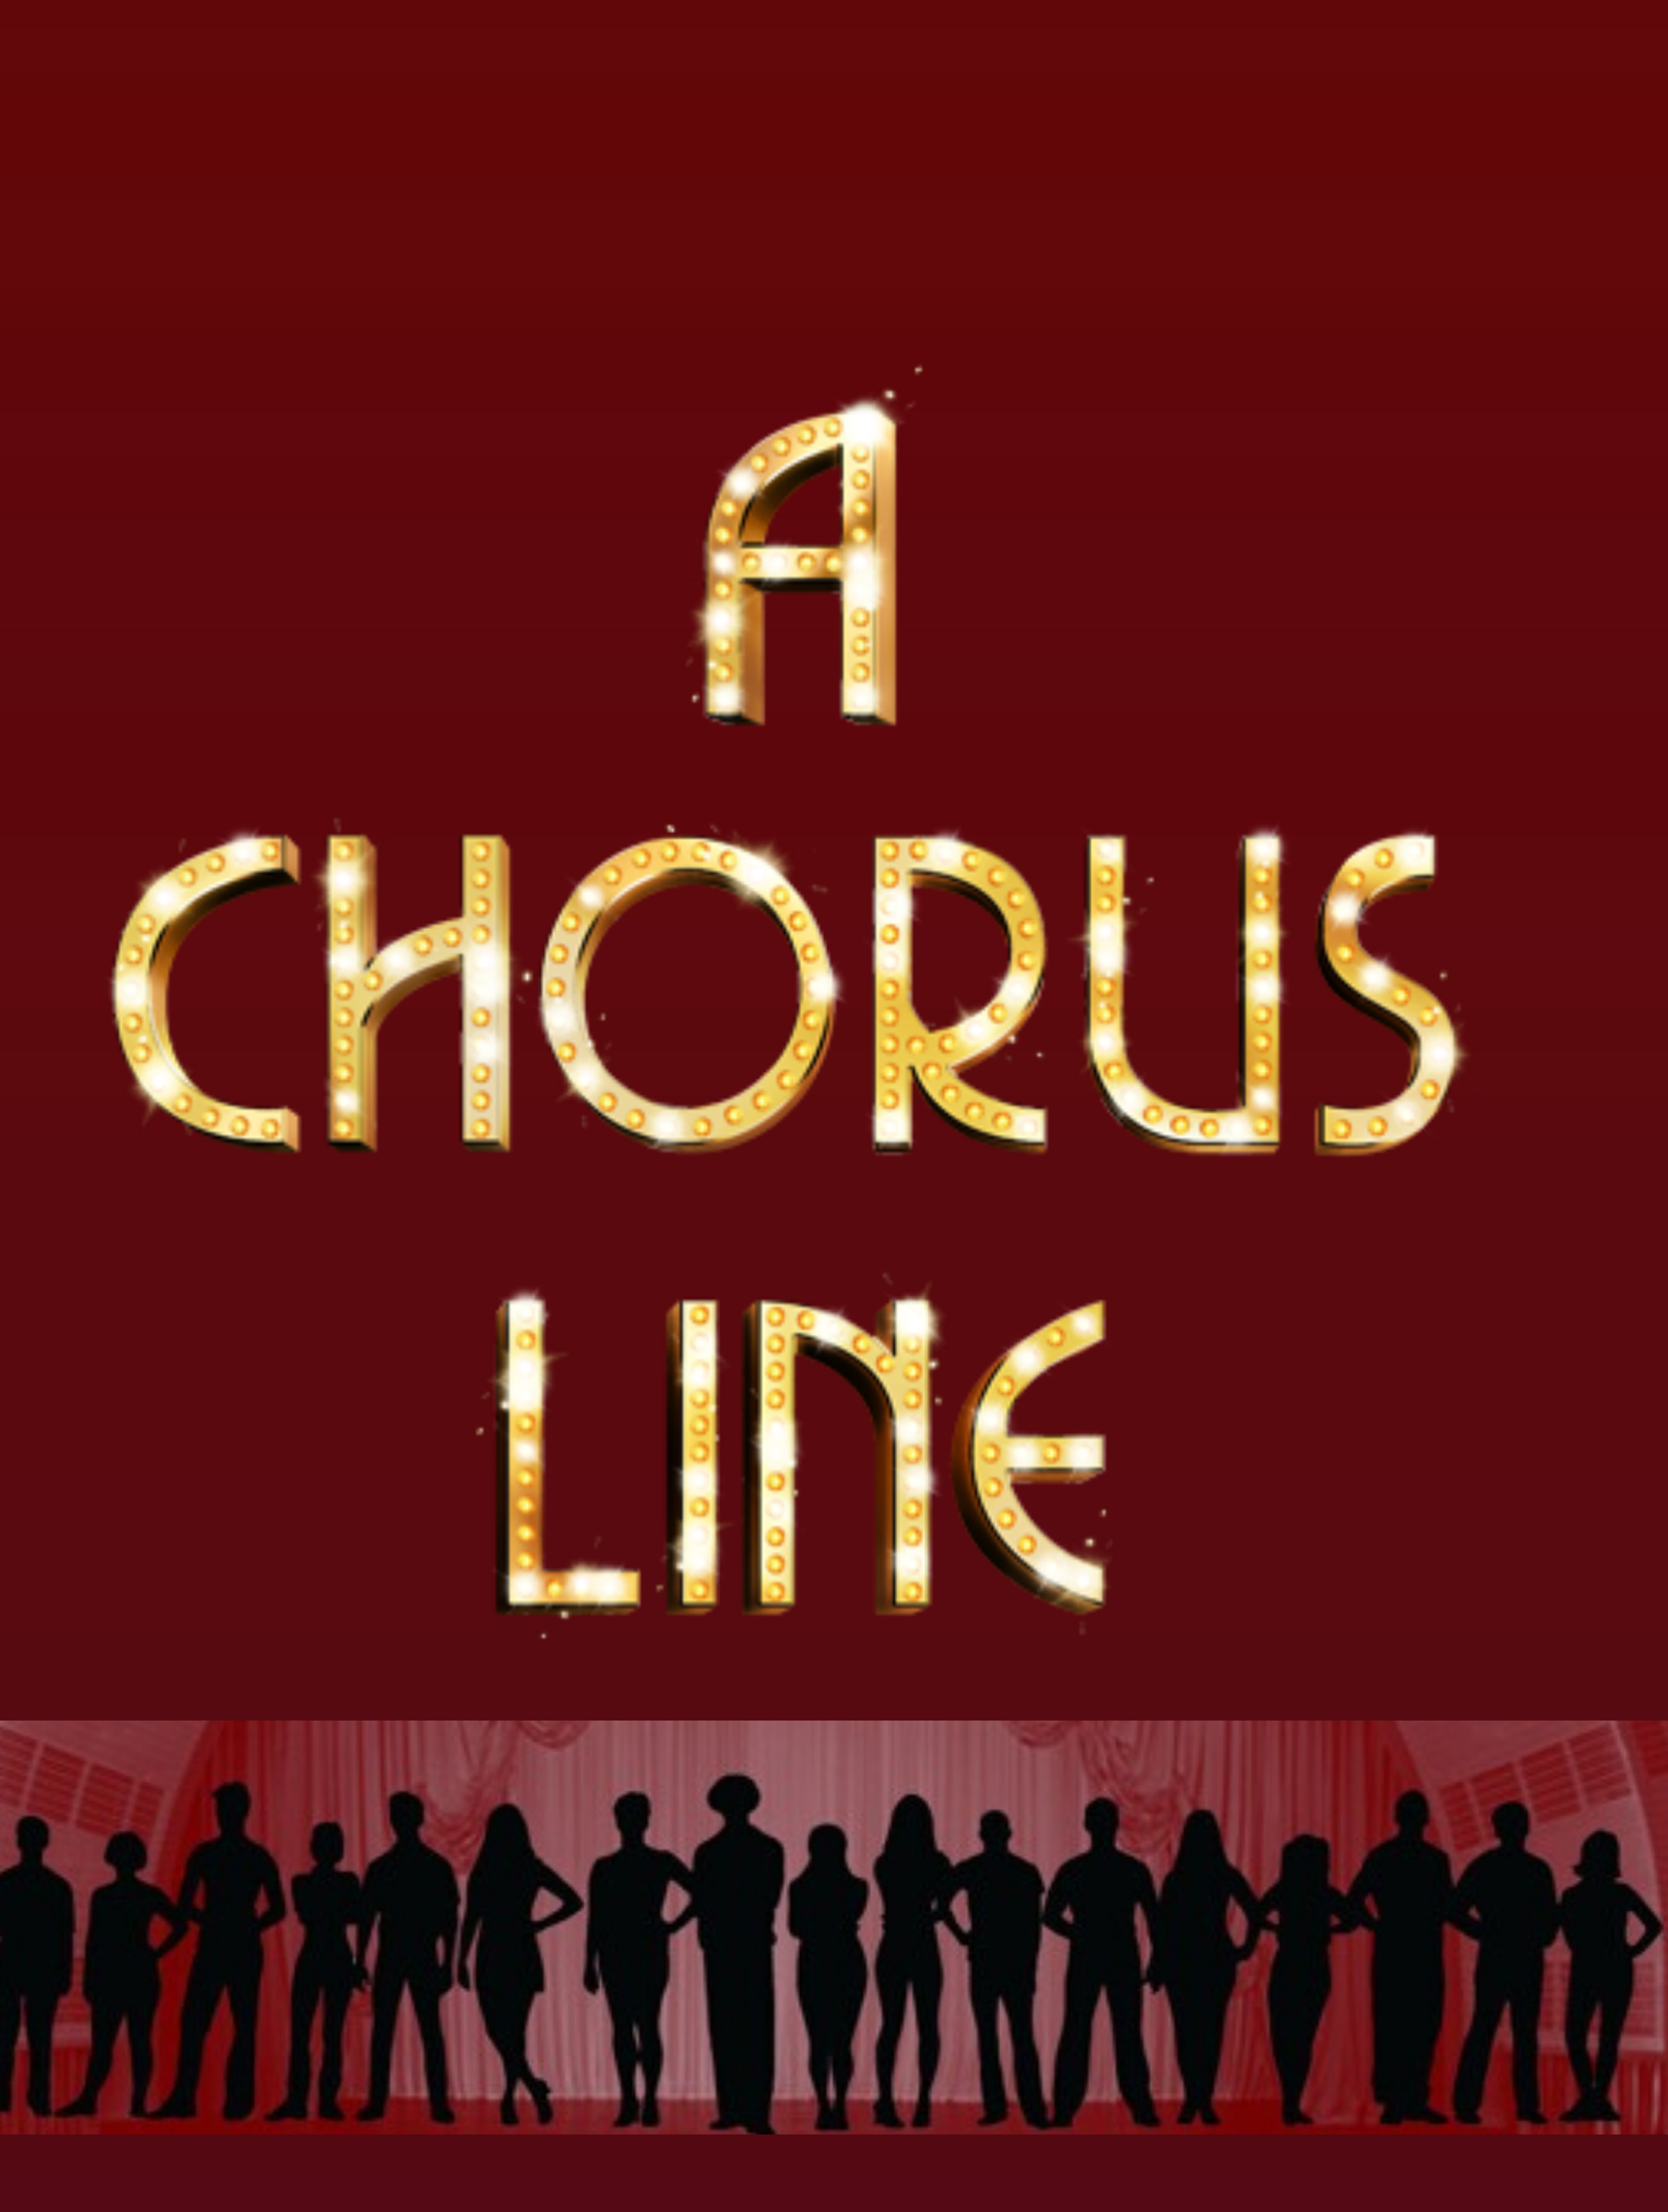 songs from the chorus line